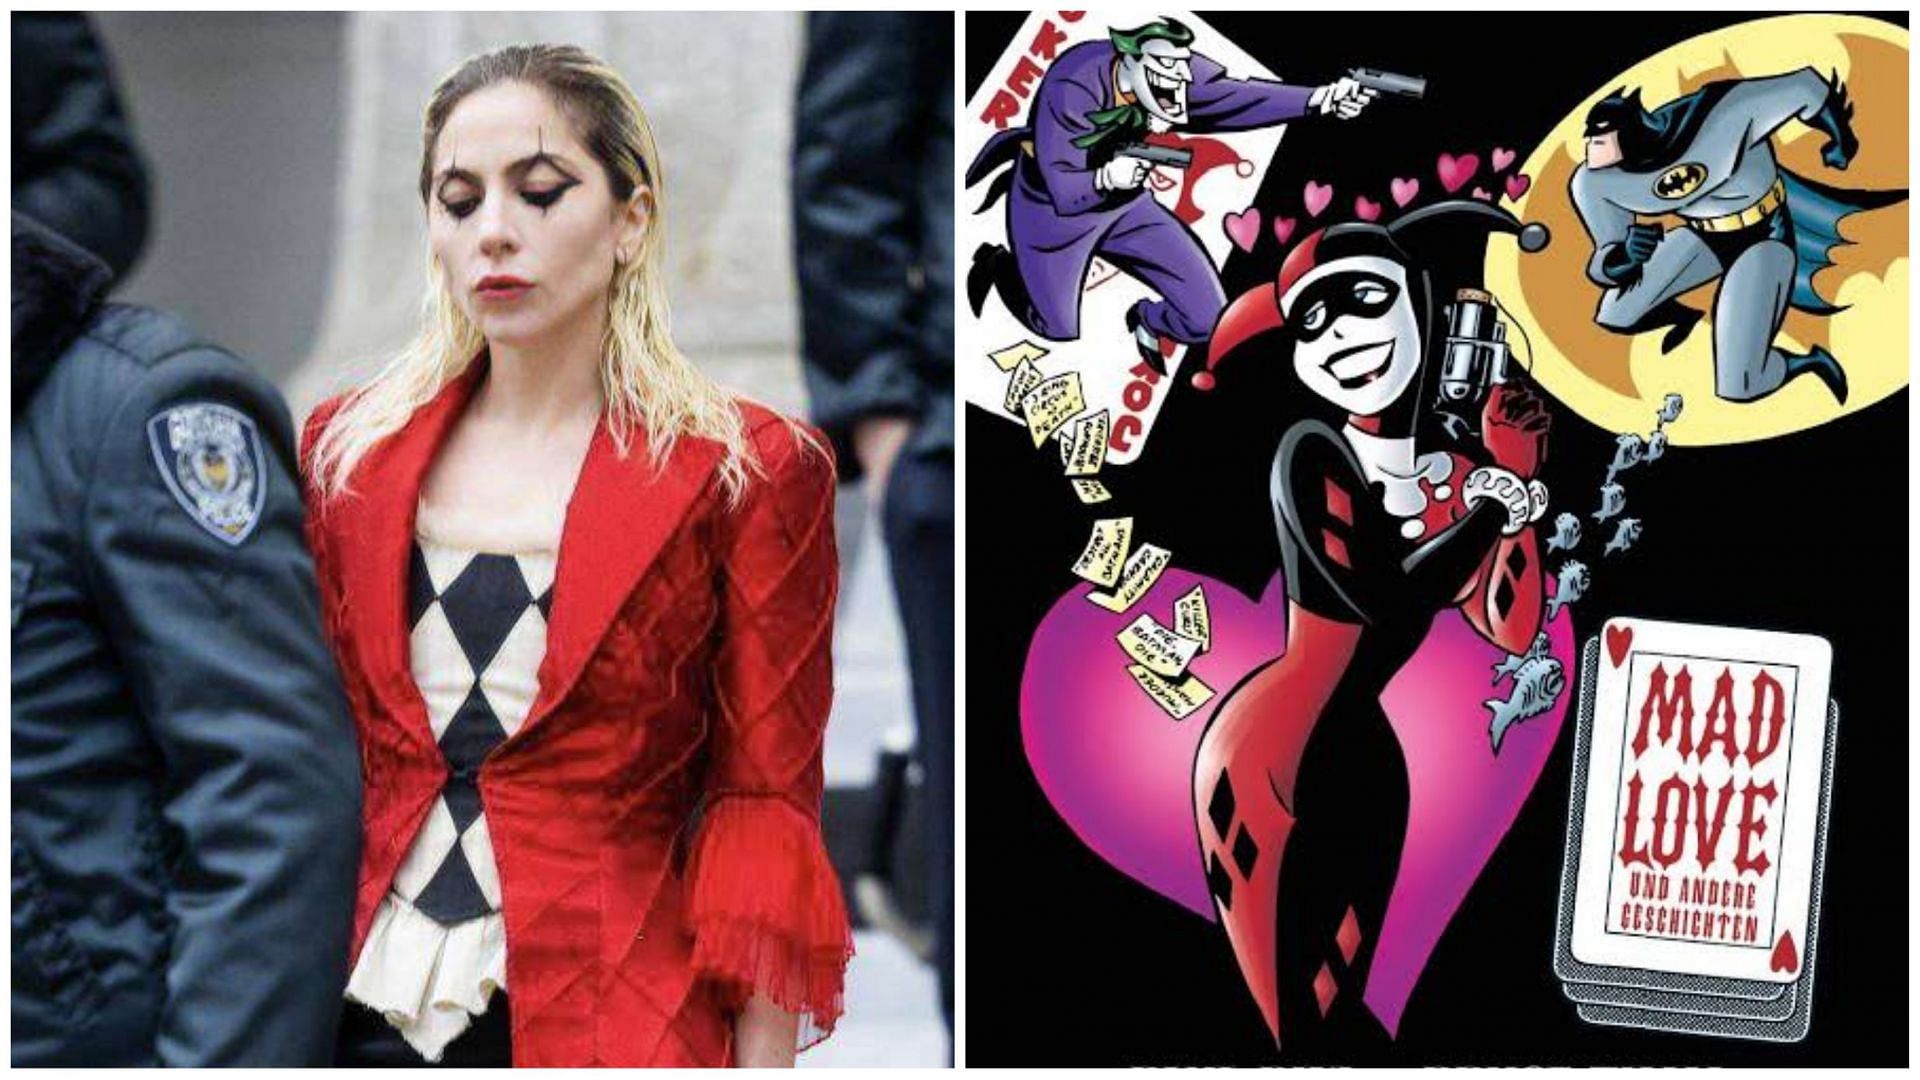 Lady Gaga as Harley Quinn and the cover for &quot;Mad Love&quot; (Images via @homeofdcu/Twitter and DC Comics)